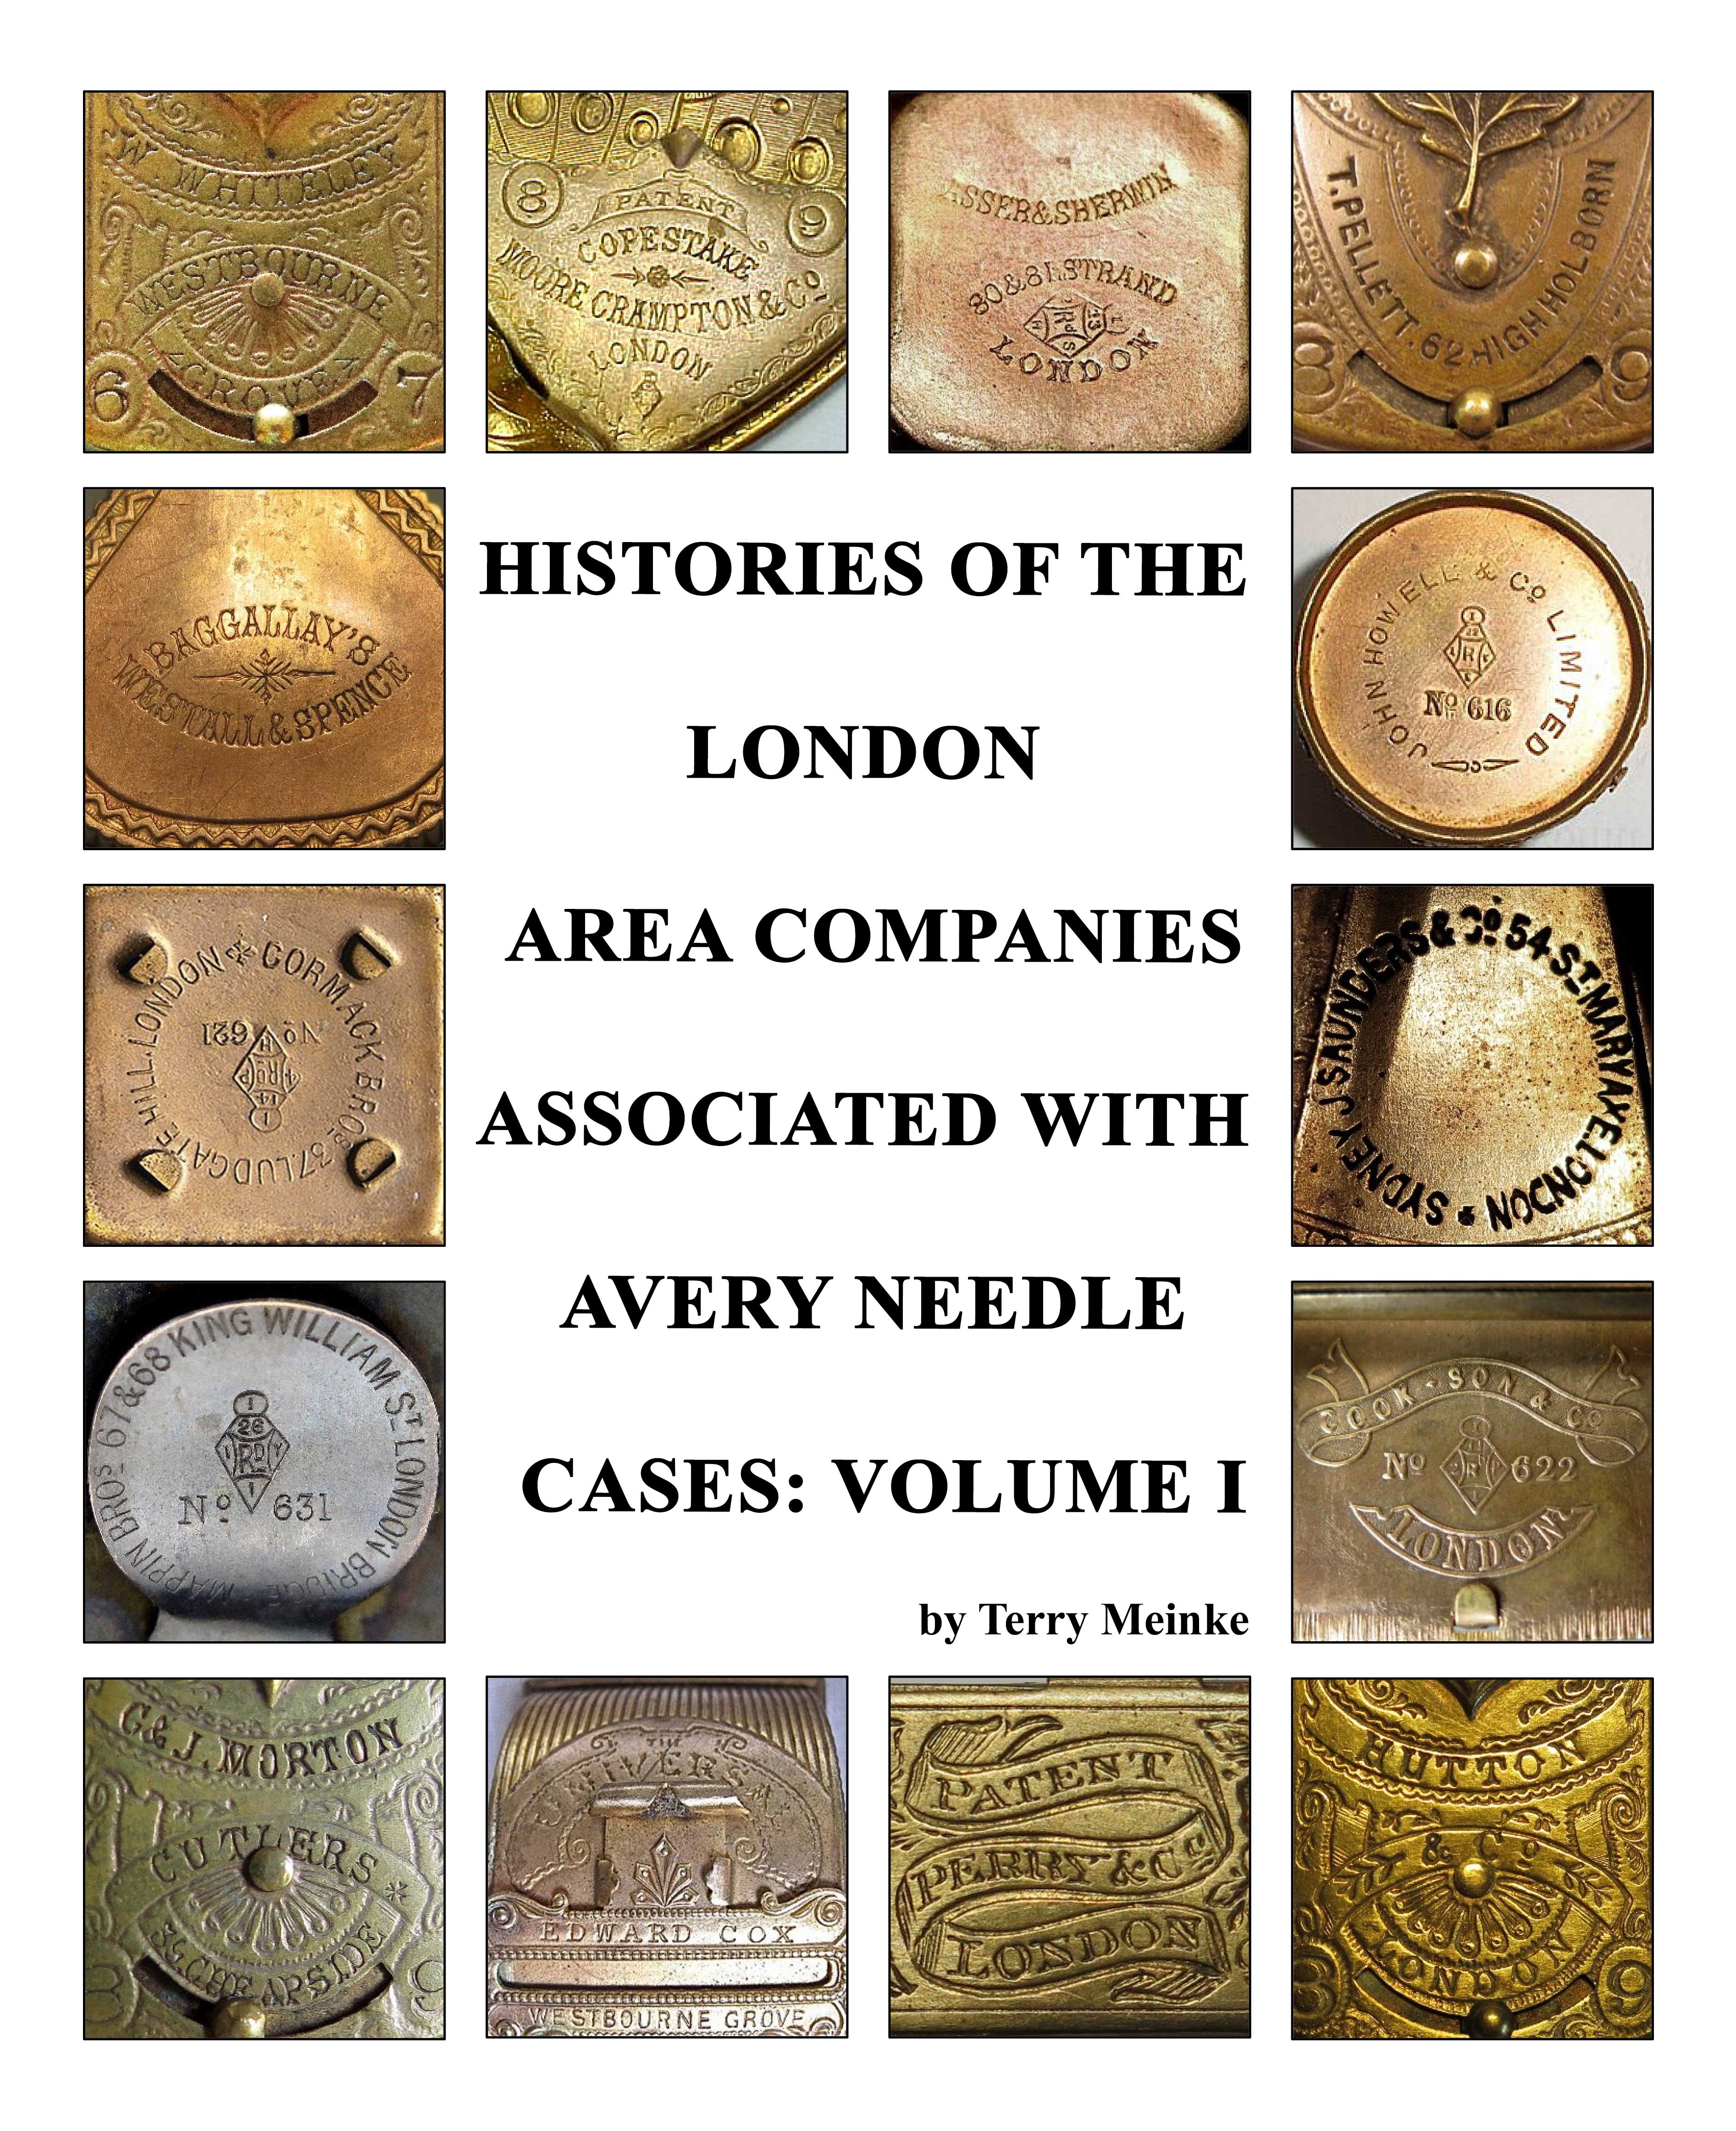 Histories of the London Area Manufacturers Associated with Avey Needle Cases